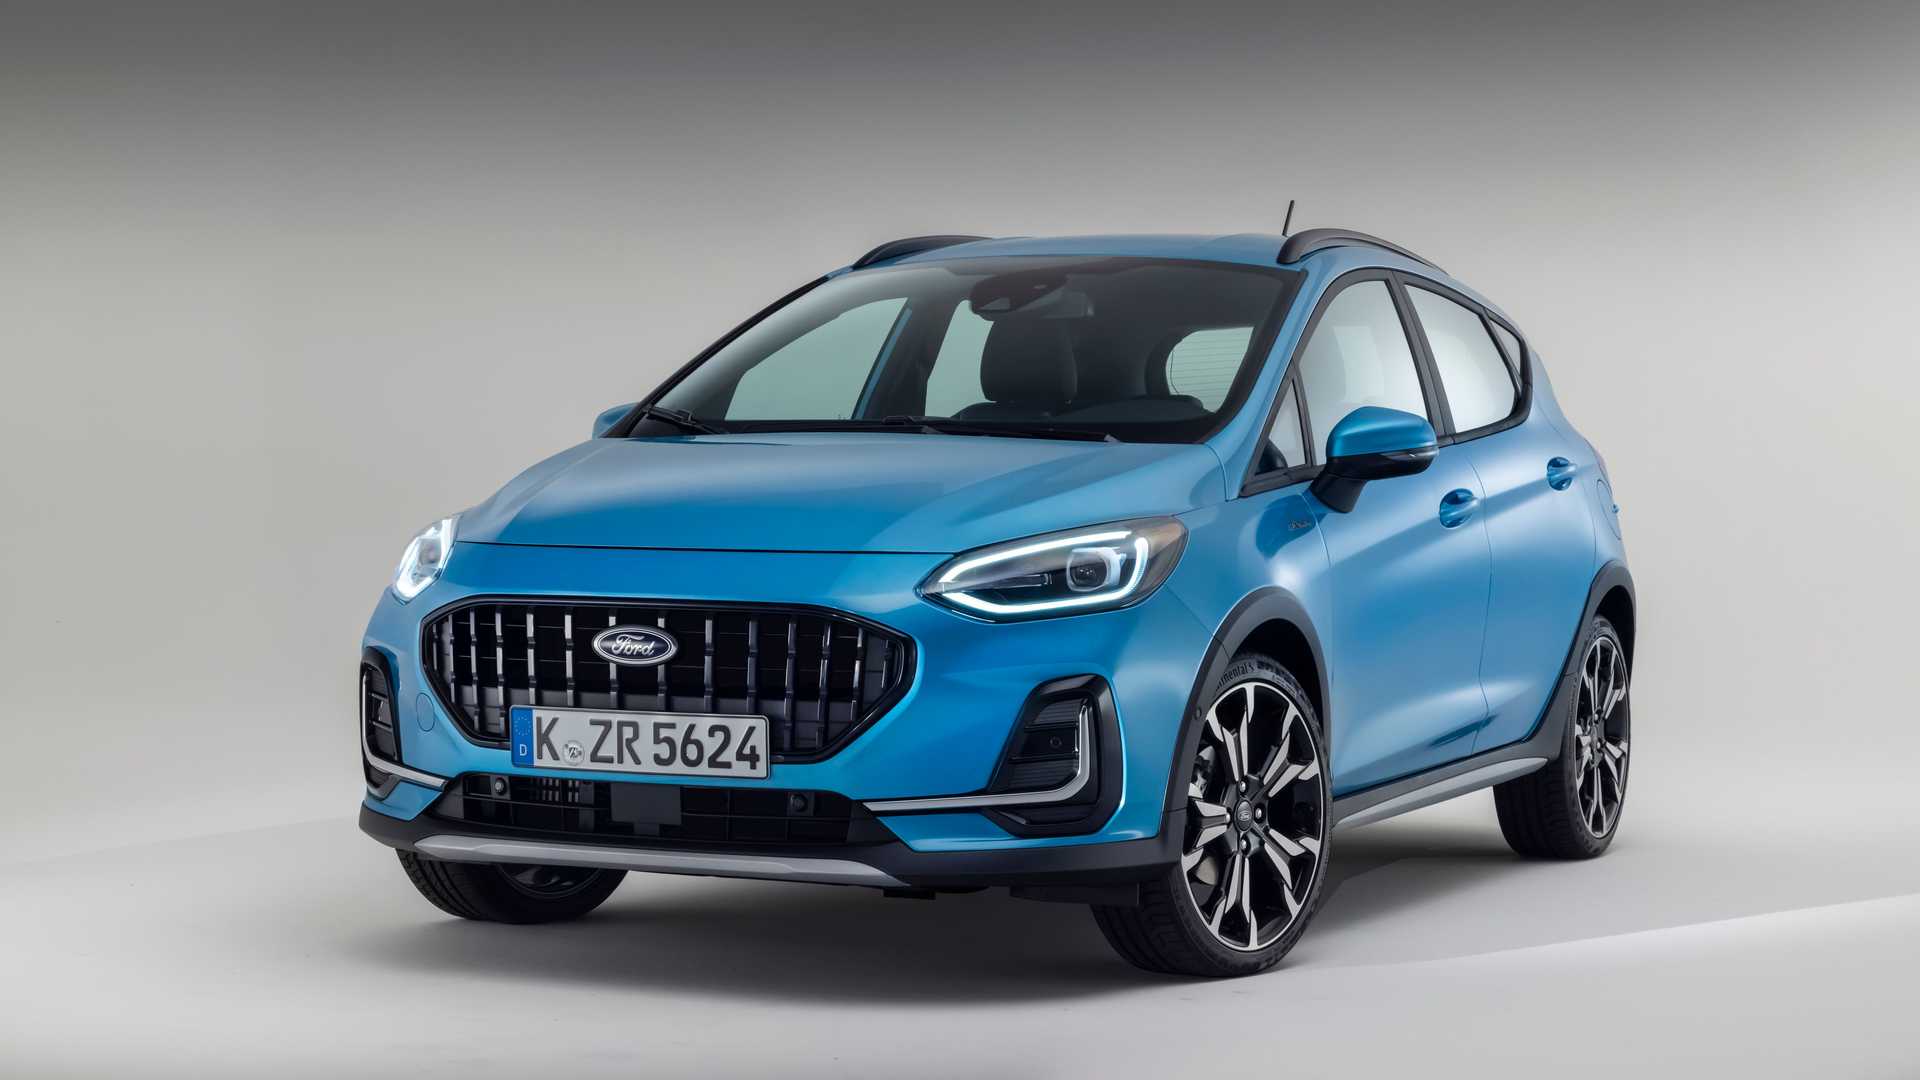 2022 Ford Fiesta Shows Discreet Facelift St Hot Hatch Gains More